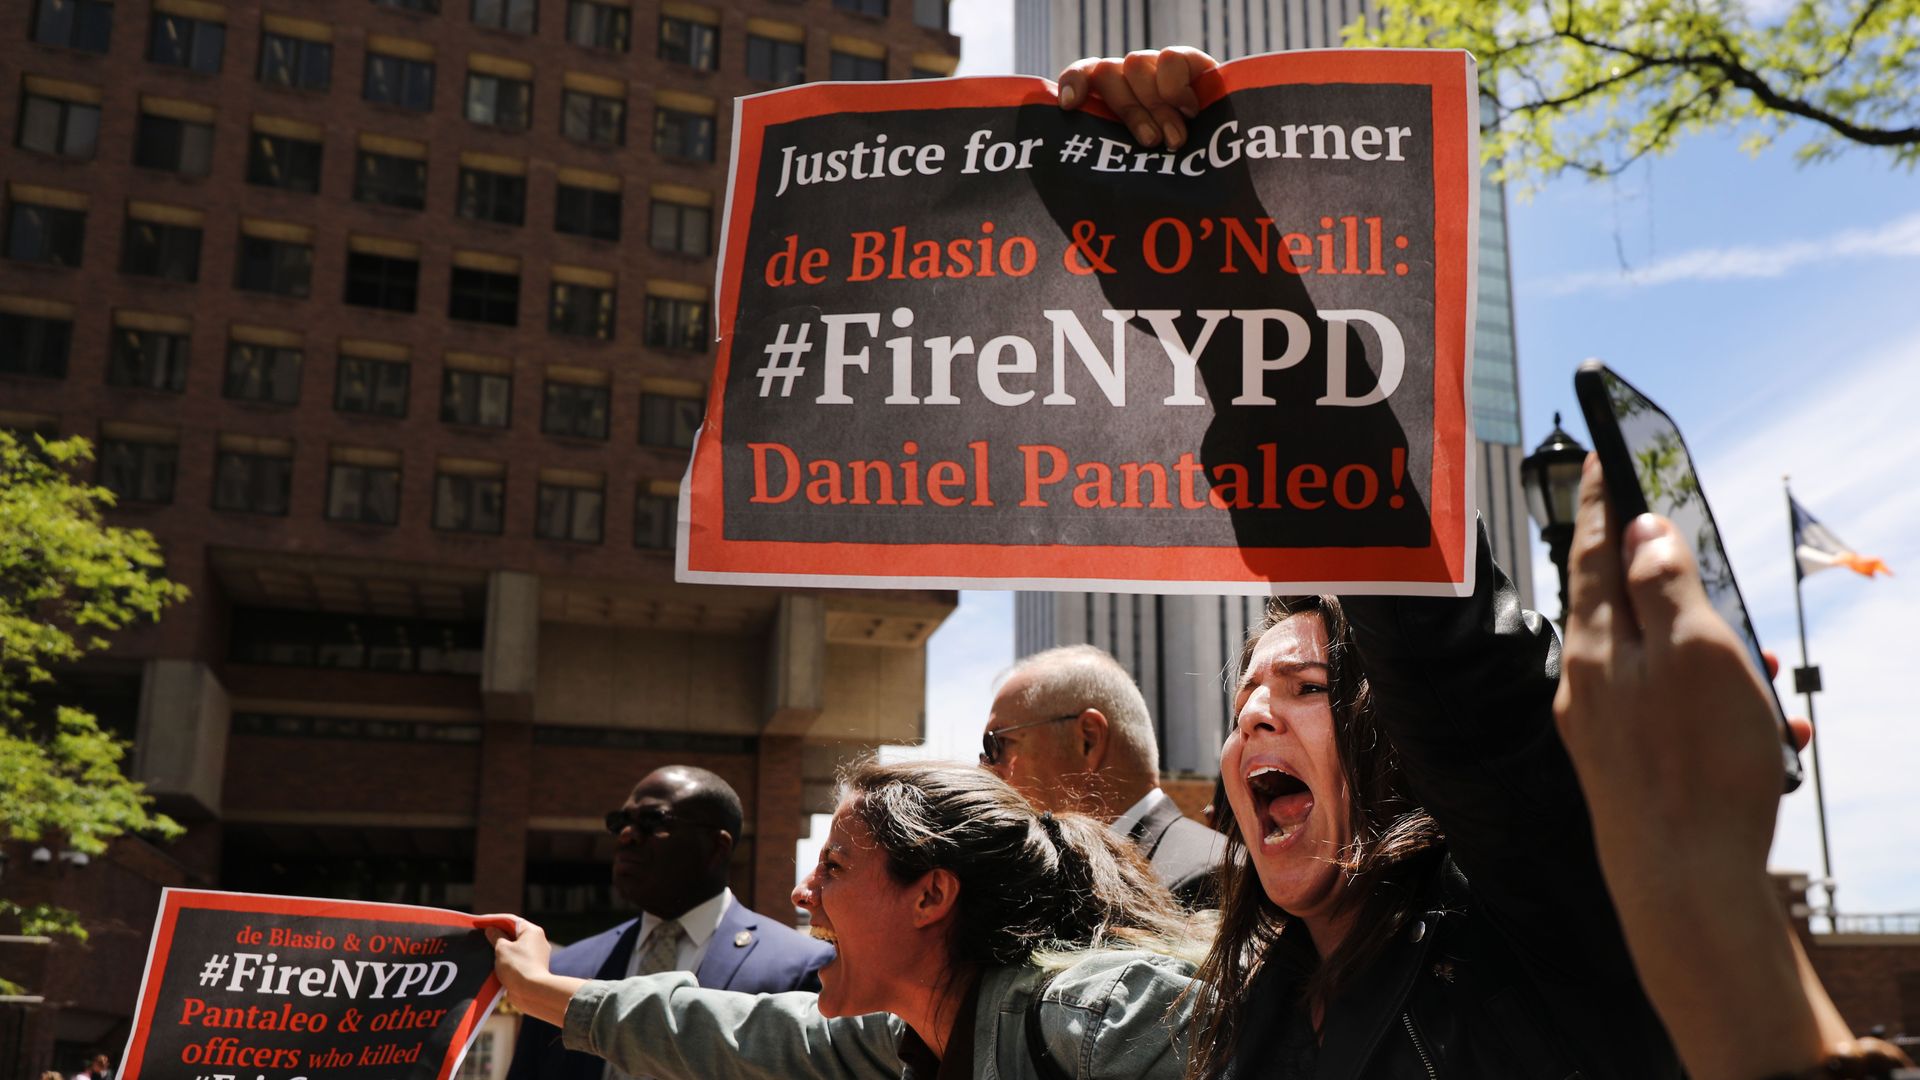 Protesters calling for officer Daniel Pantaleo to be fired following Eric Garner's death